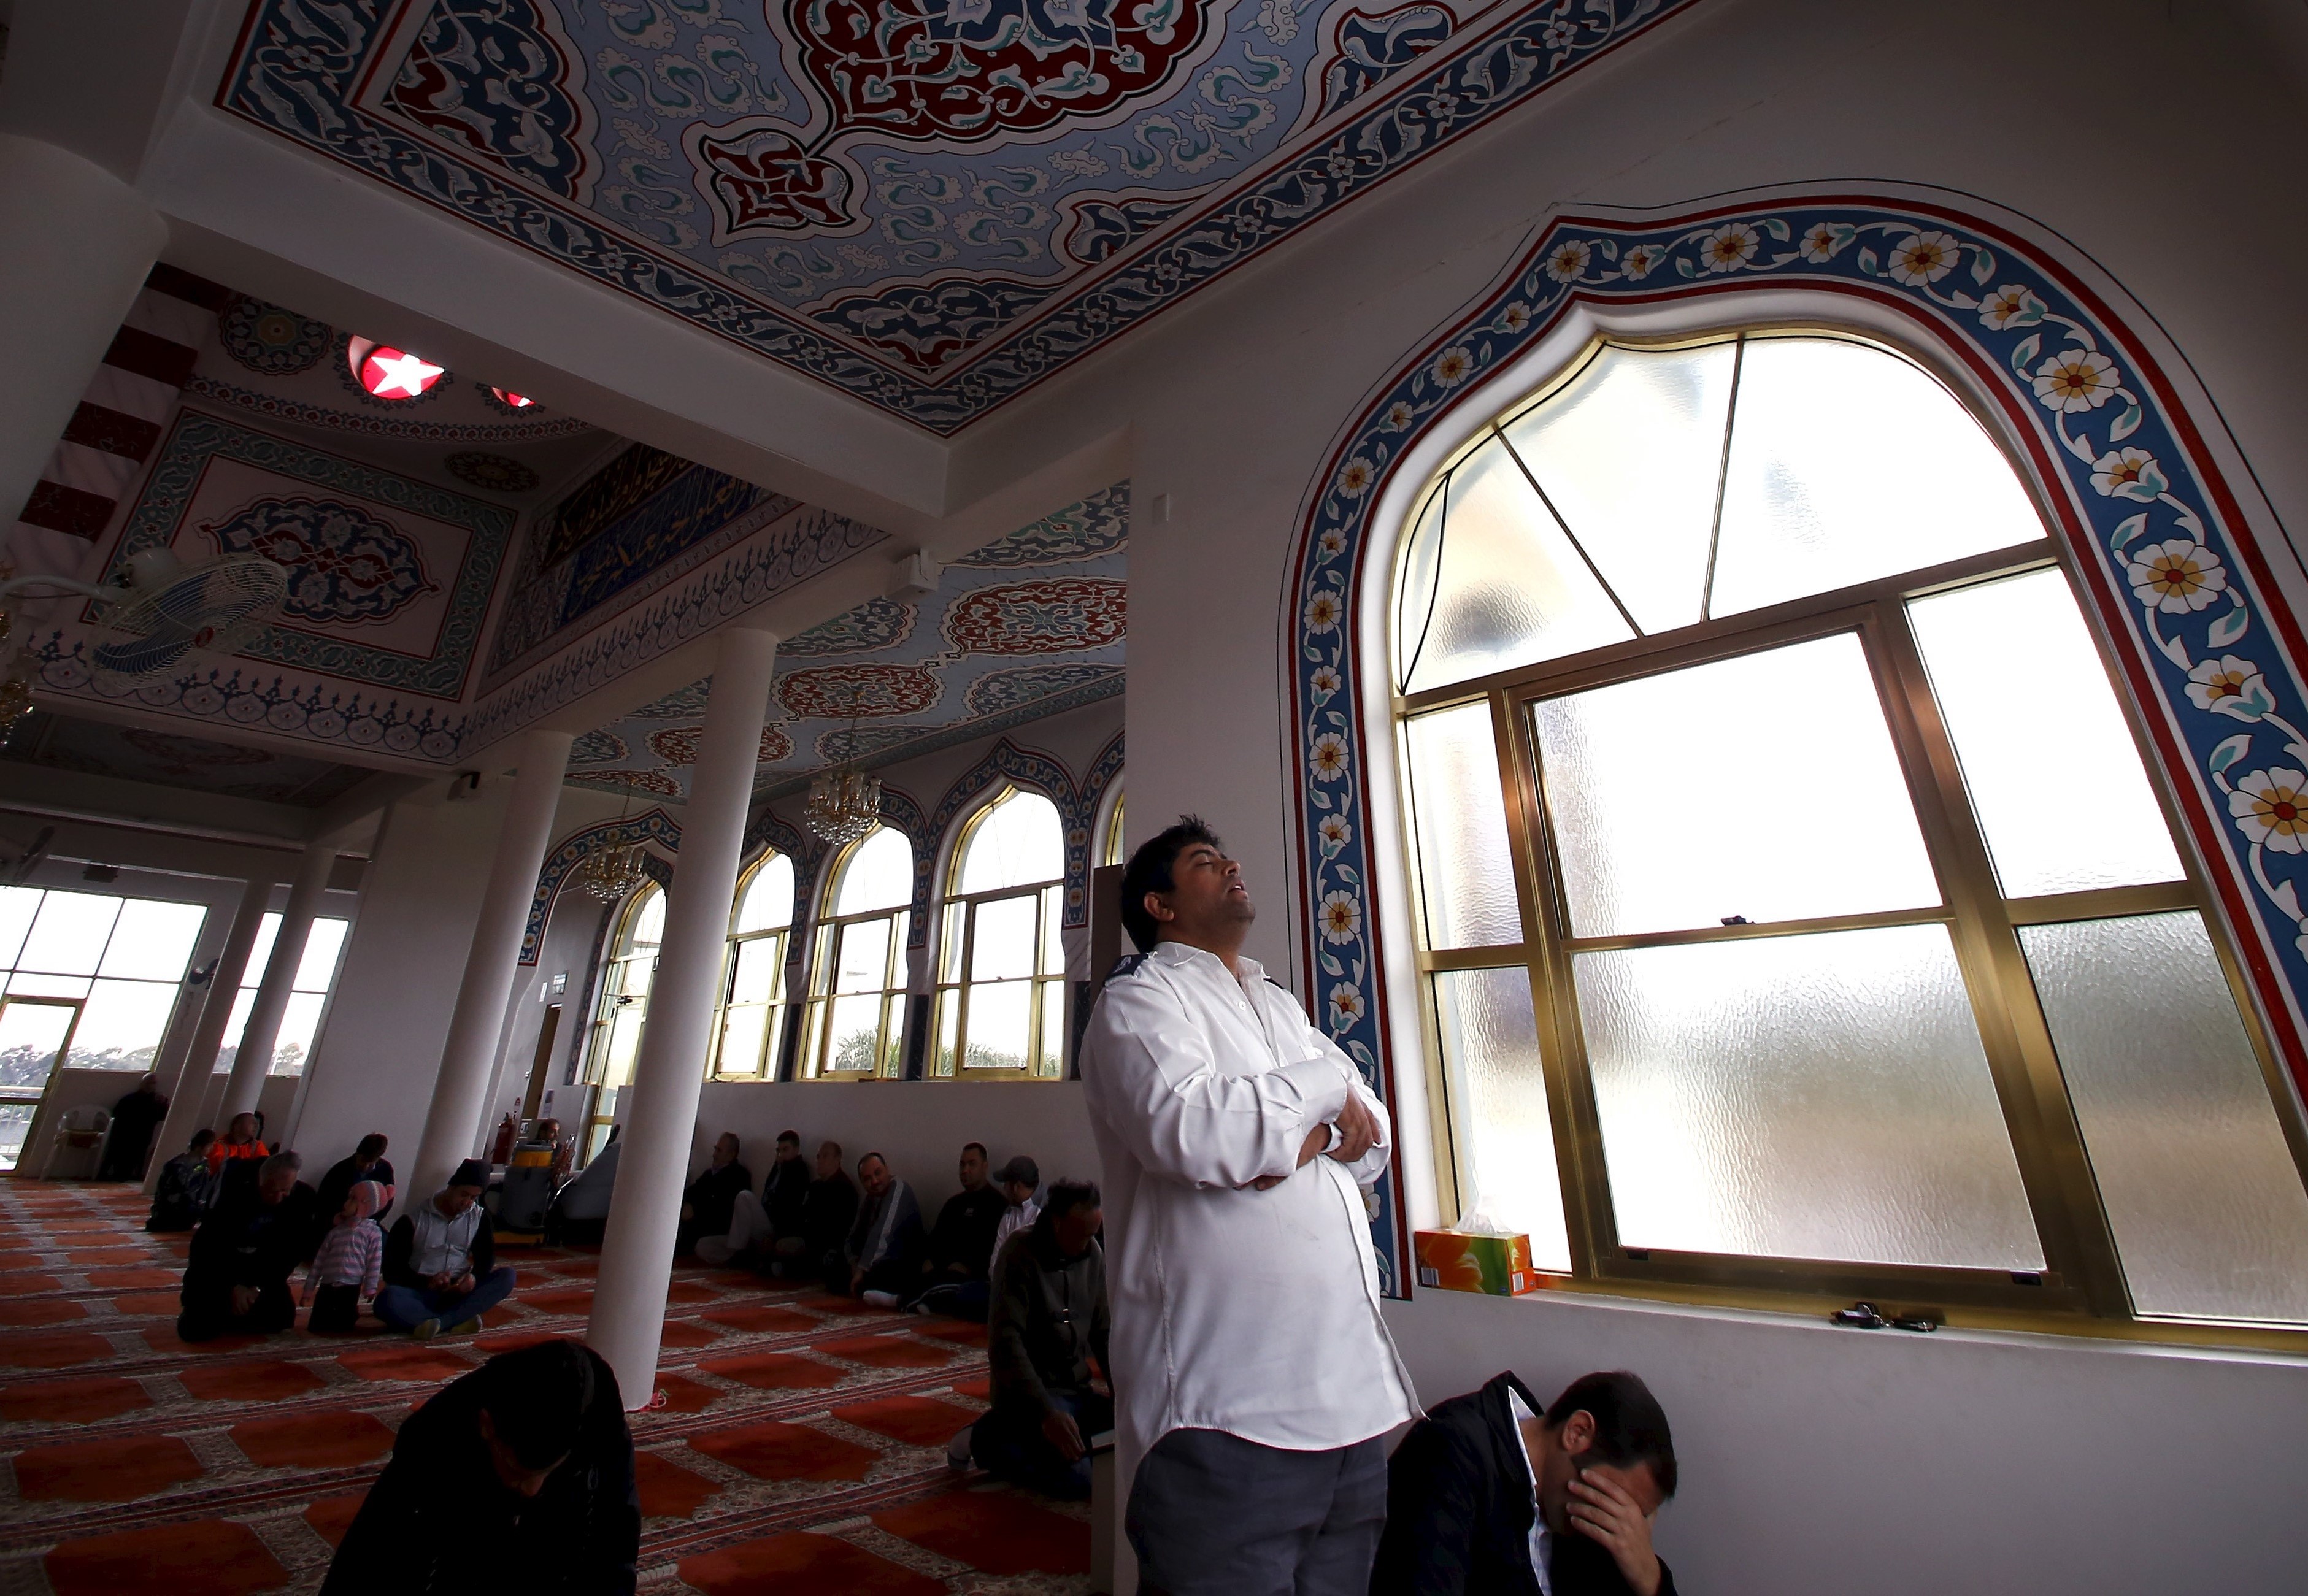 Muslim worshippers pray, during the holy month of Ramadan, in the Gallipoli Mosque located in the western Sydney suburb of Auburn, Australia, July 10, 2015. Picture taken 10 July, 2015 (REUTERS)